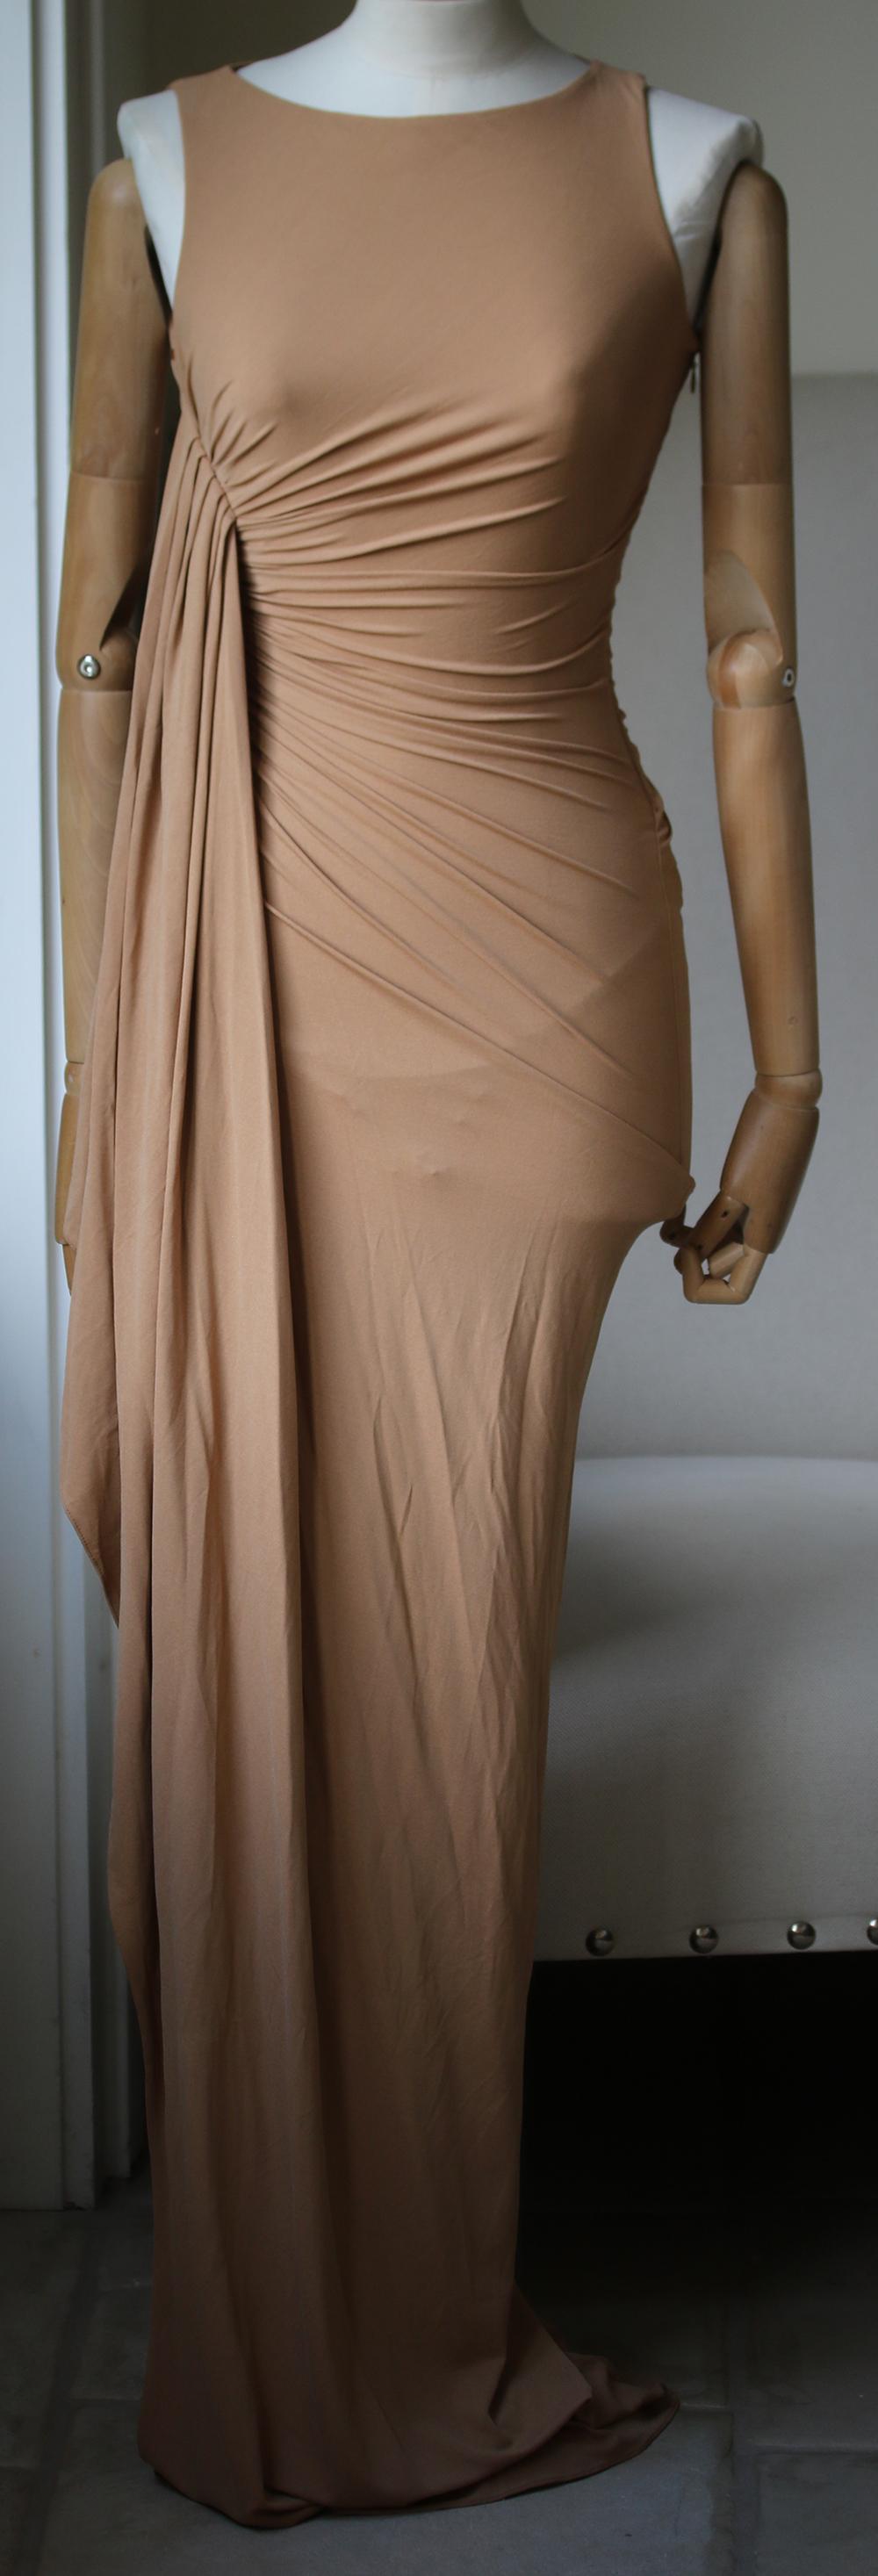 A red carpet favourite with the Hollywood set, Michael Kors' nude column gown is a scene-stealing style. A cascading drape and cross-body ruching will shape a stunning silhouette that needs little embellishment. Michael Kors sleeveless gown: nude